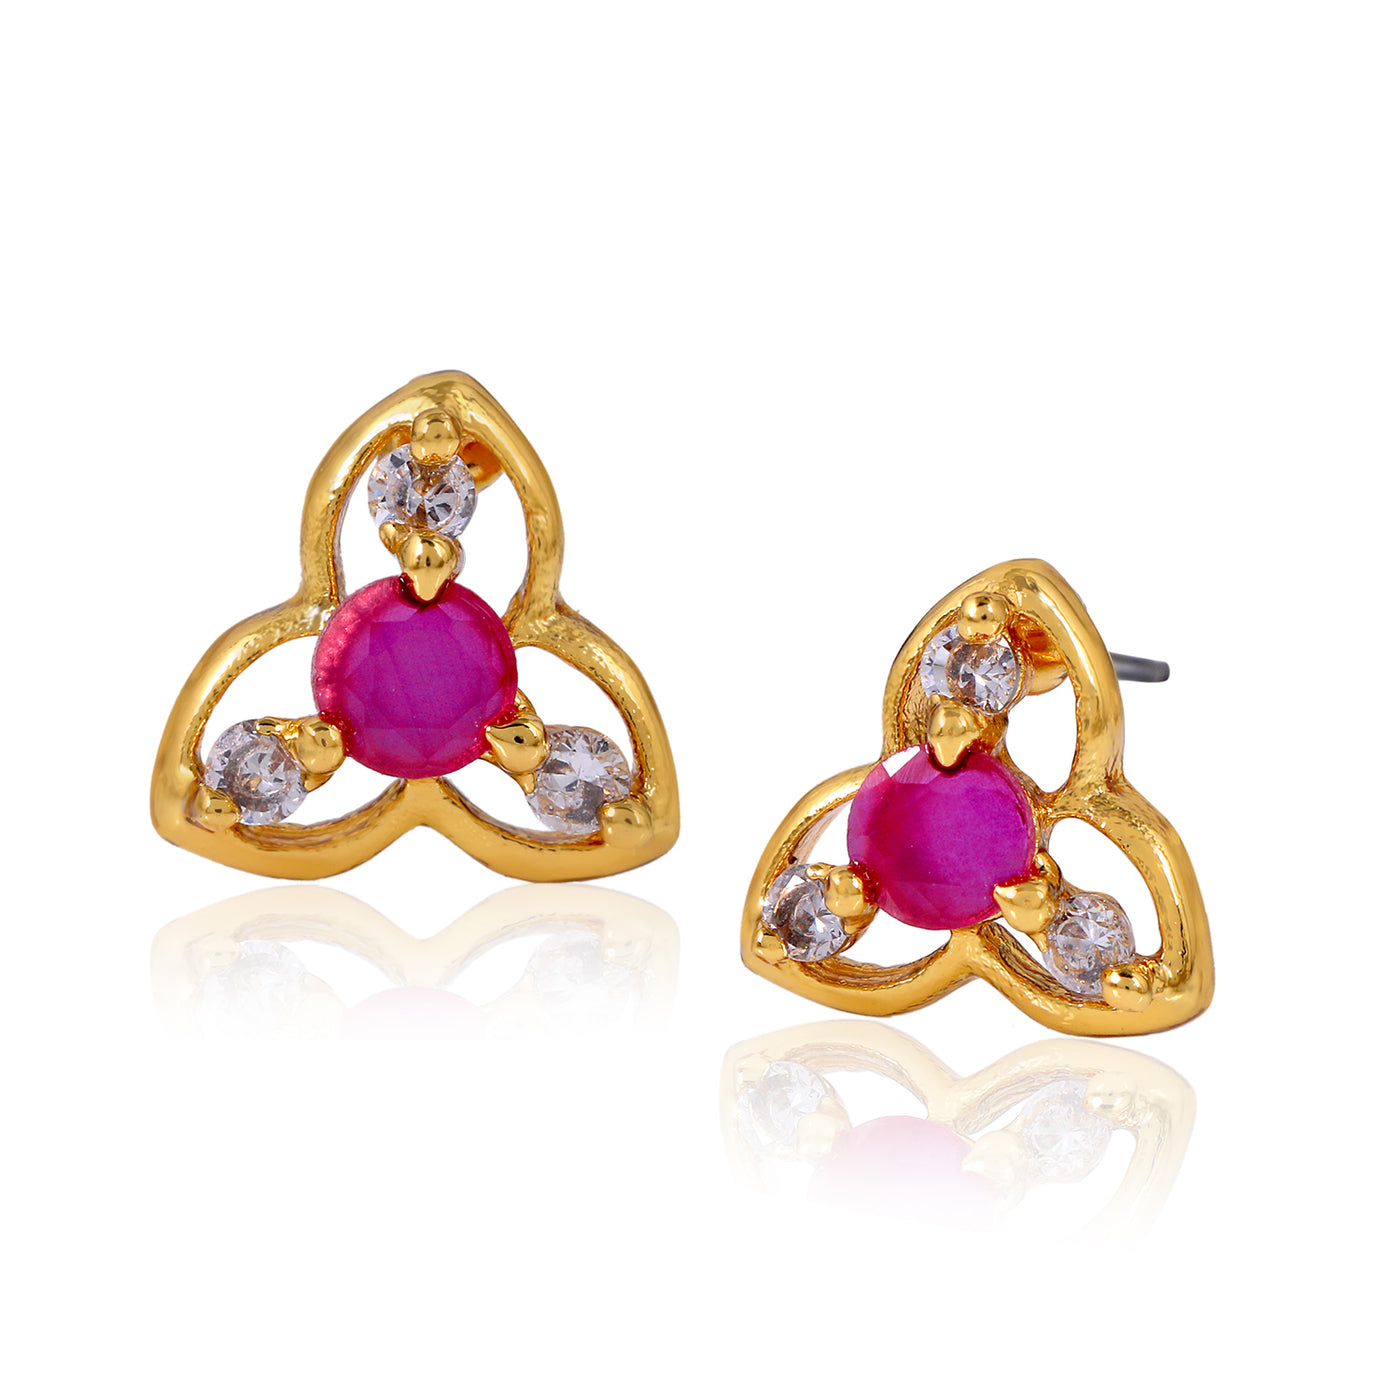 Estele Gold Plated CZ Floral Stud Earrings with Ruby Stones for Women